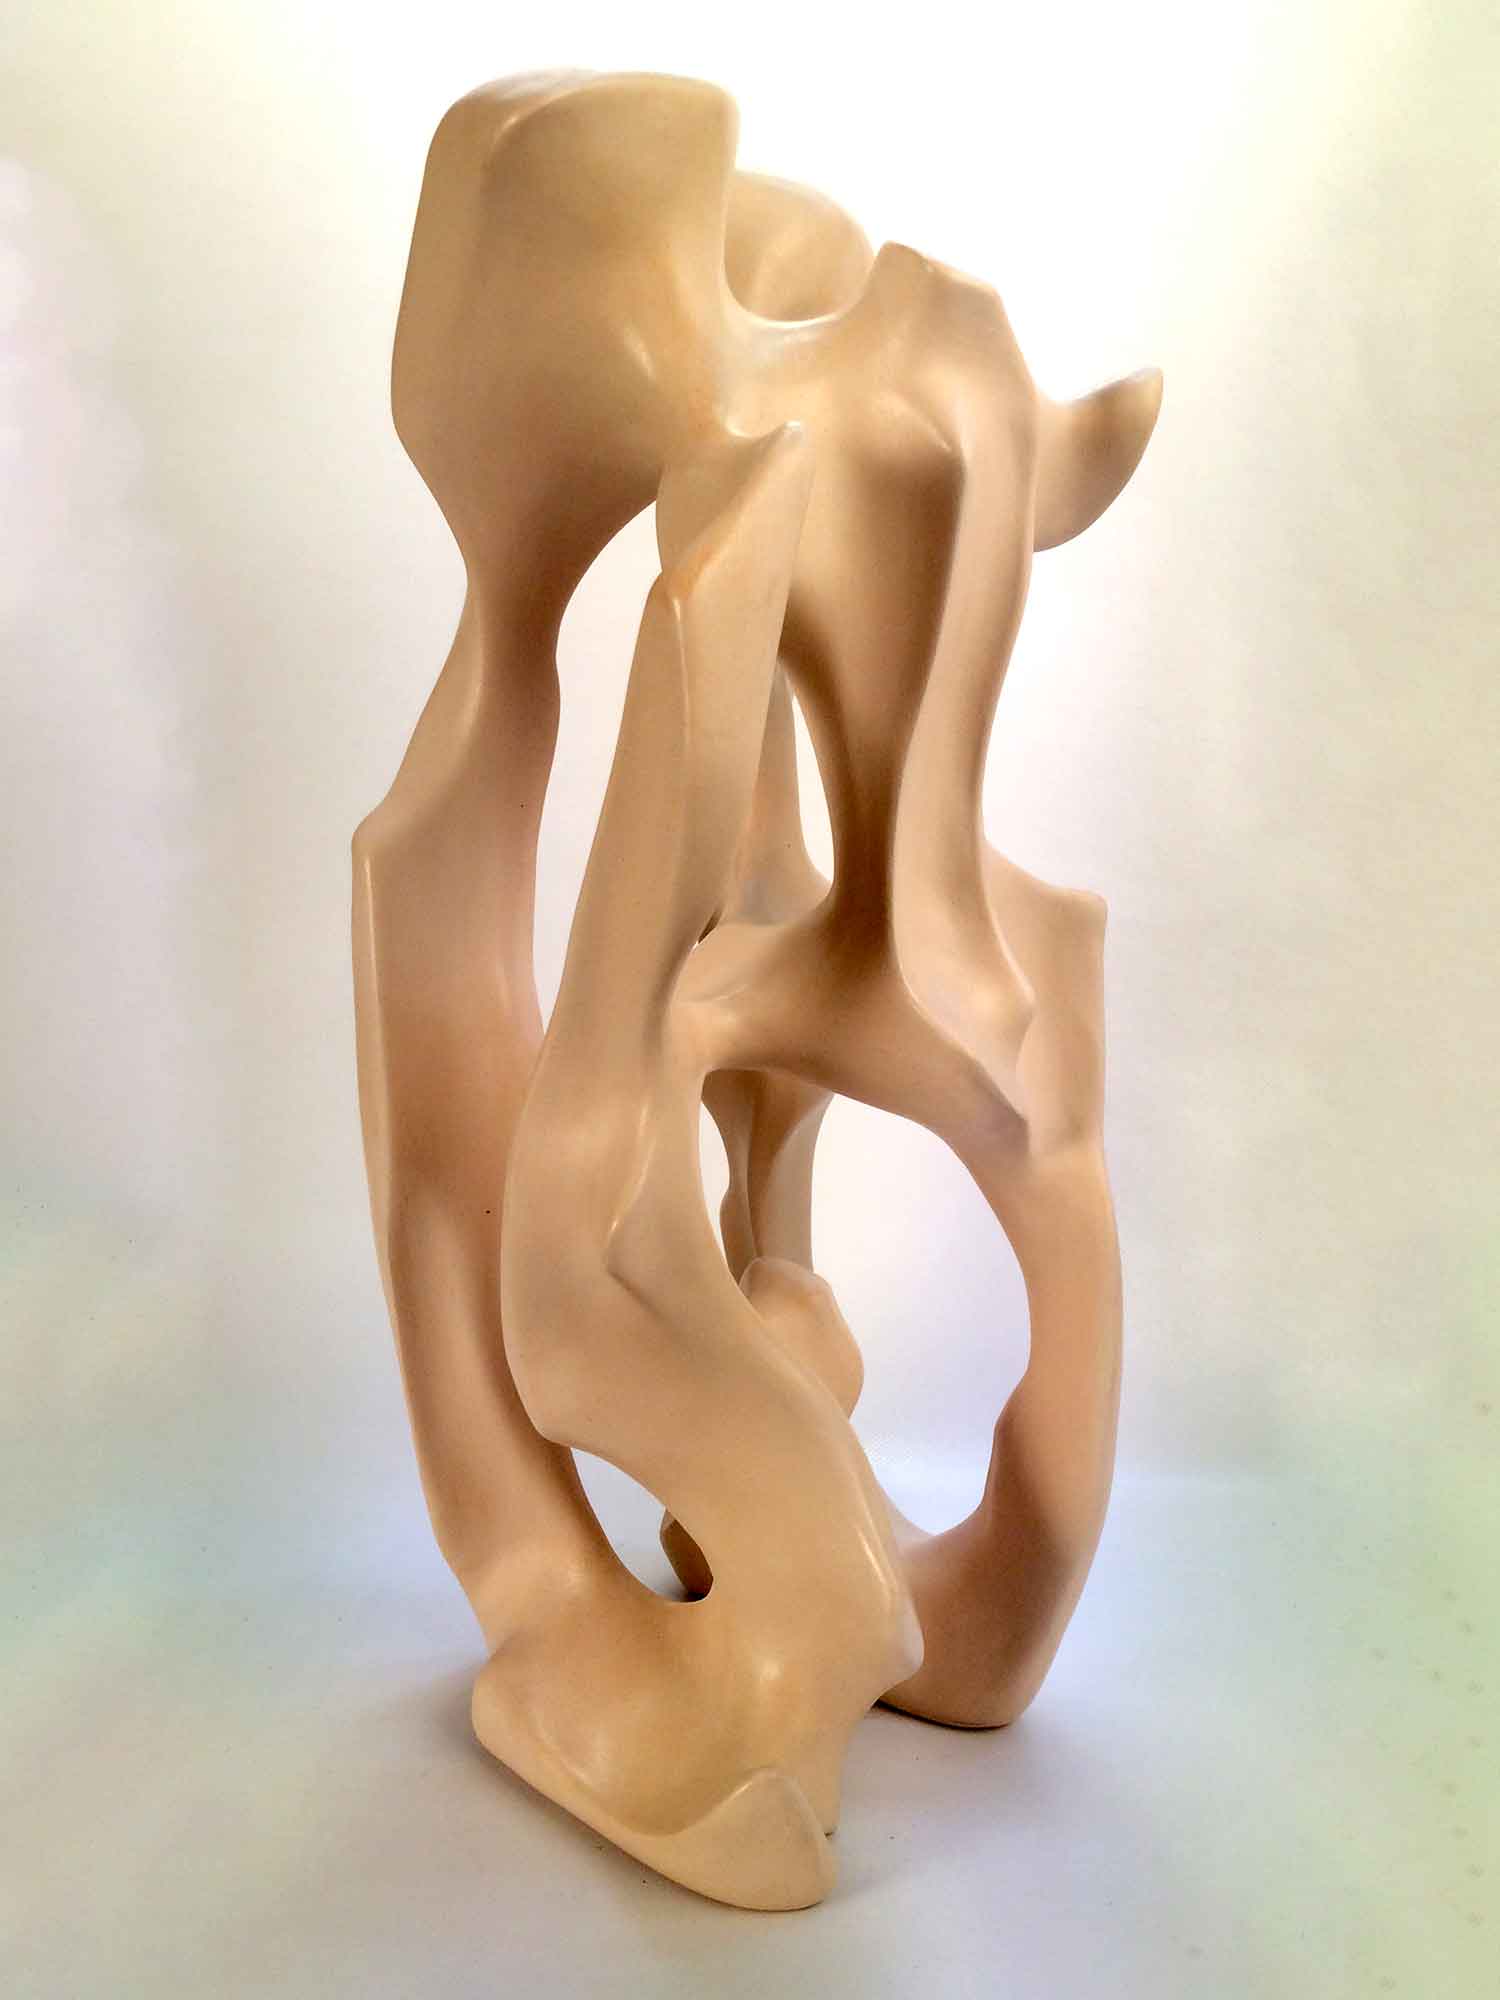 Sculpture with organic forms